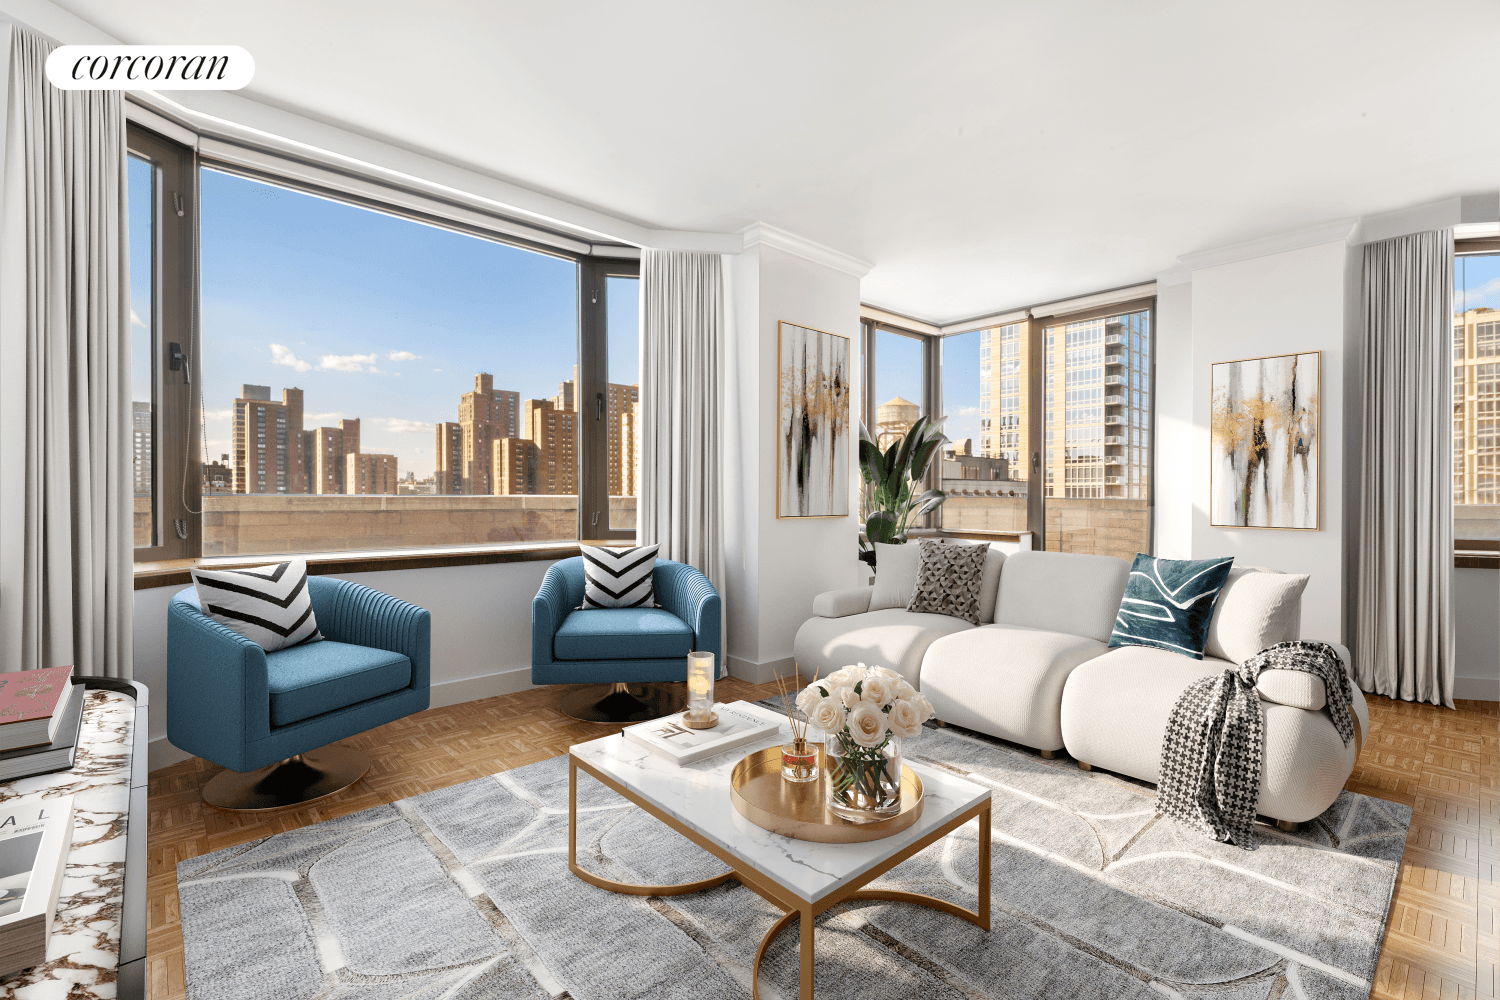 Experience the most valuable 3 Bedroom residence with private outdoor space within the coveted 400 East 90th St.